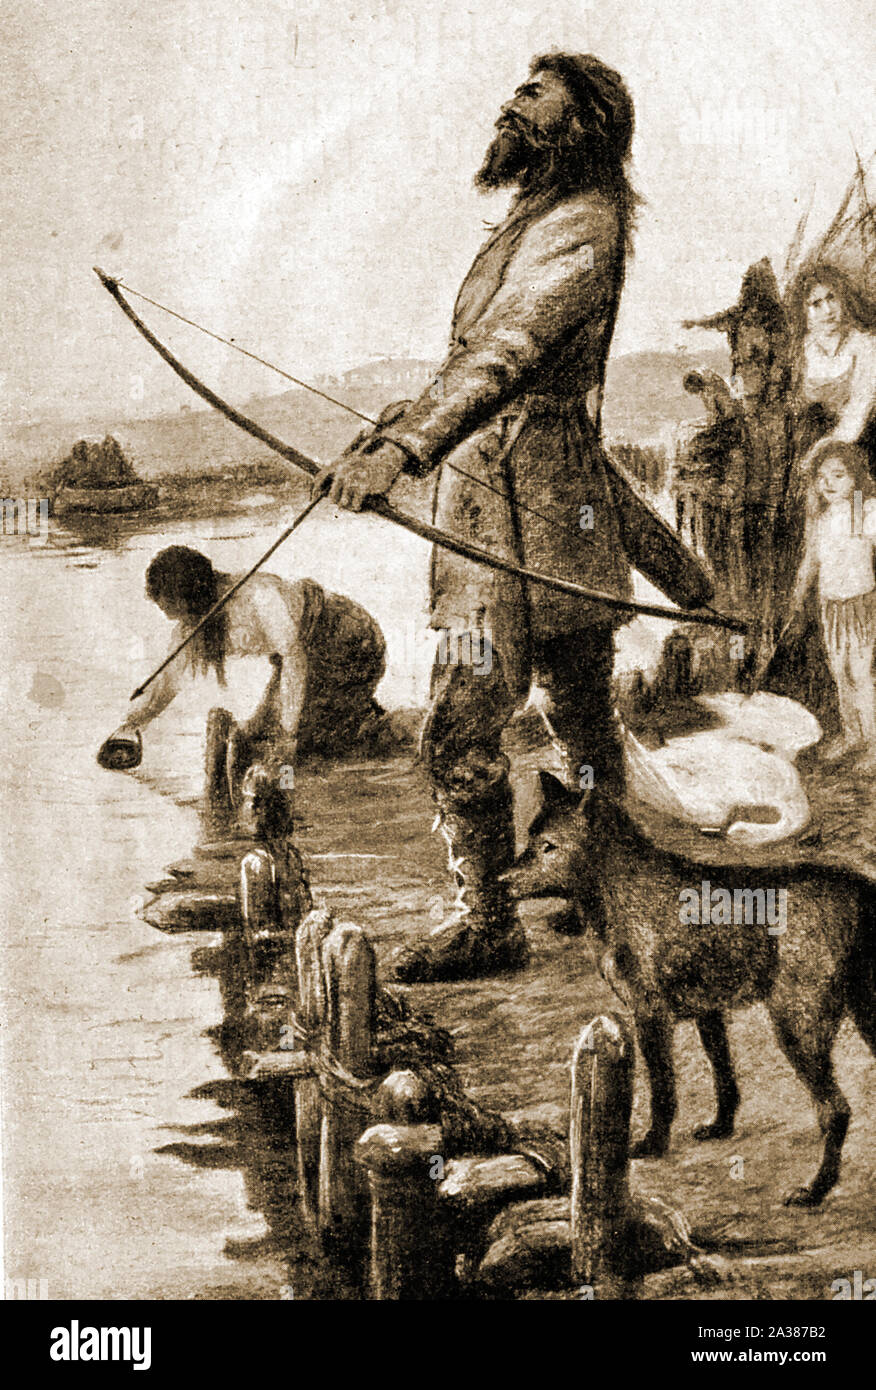 A 1920 artist's impression of a late Stone Age family, living on the edge of the river Thames near what is now the city of London, UK Stock Photo